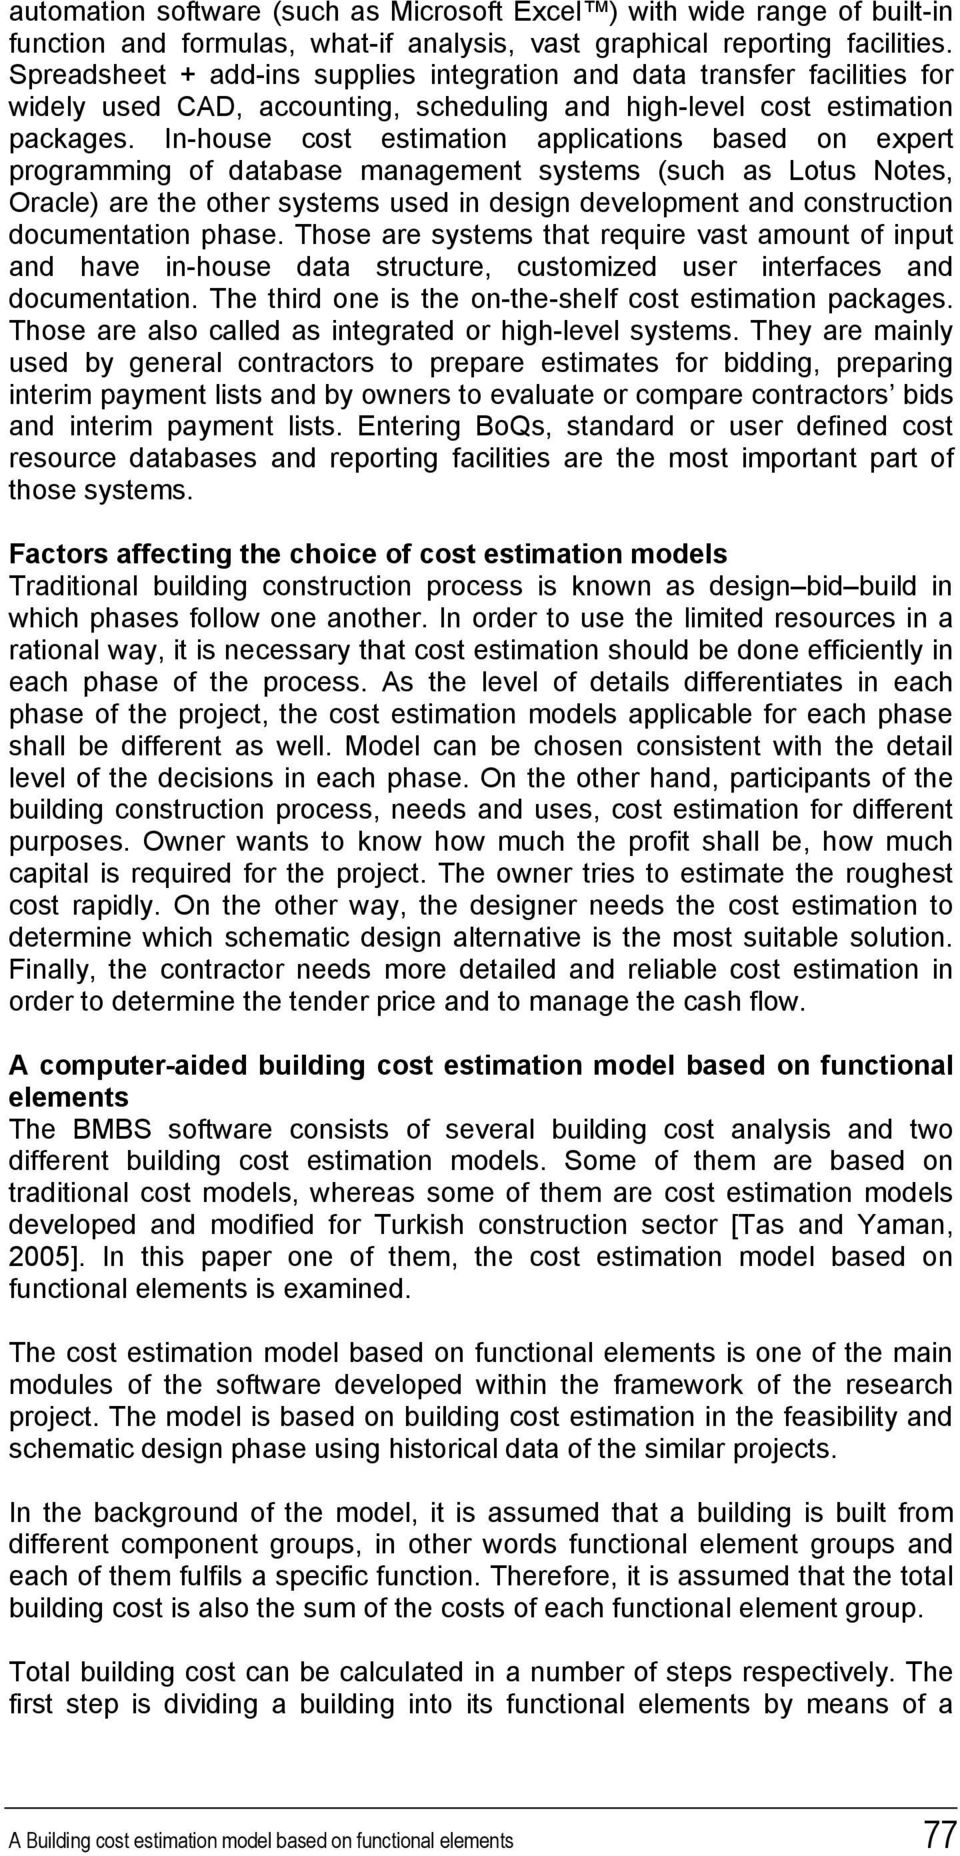 In-house cost estimation applications based on expert programming of database management systems (such as Lotus Notes, Oracle) are the other systems used in design development and construction